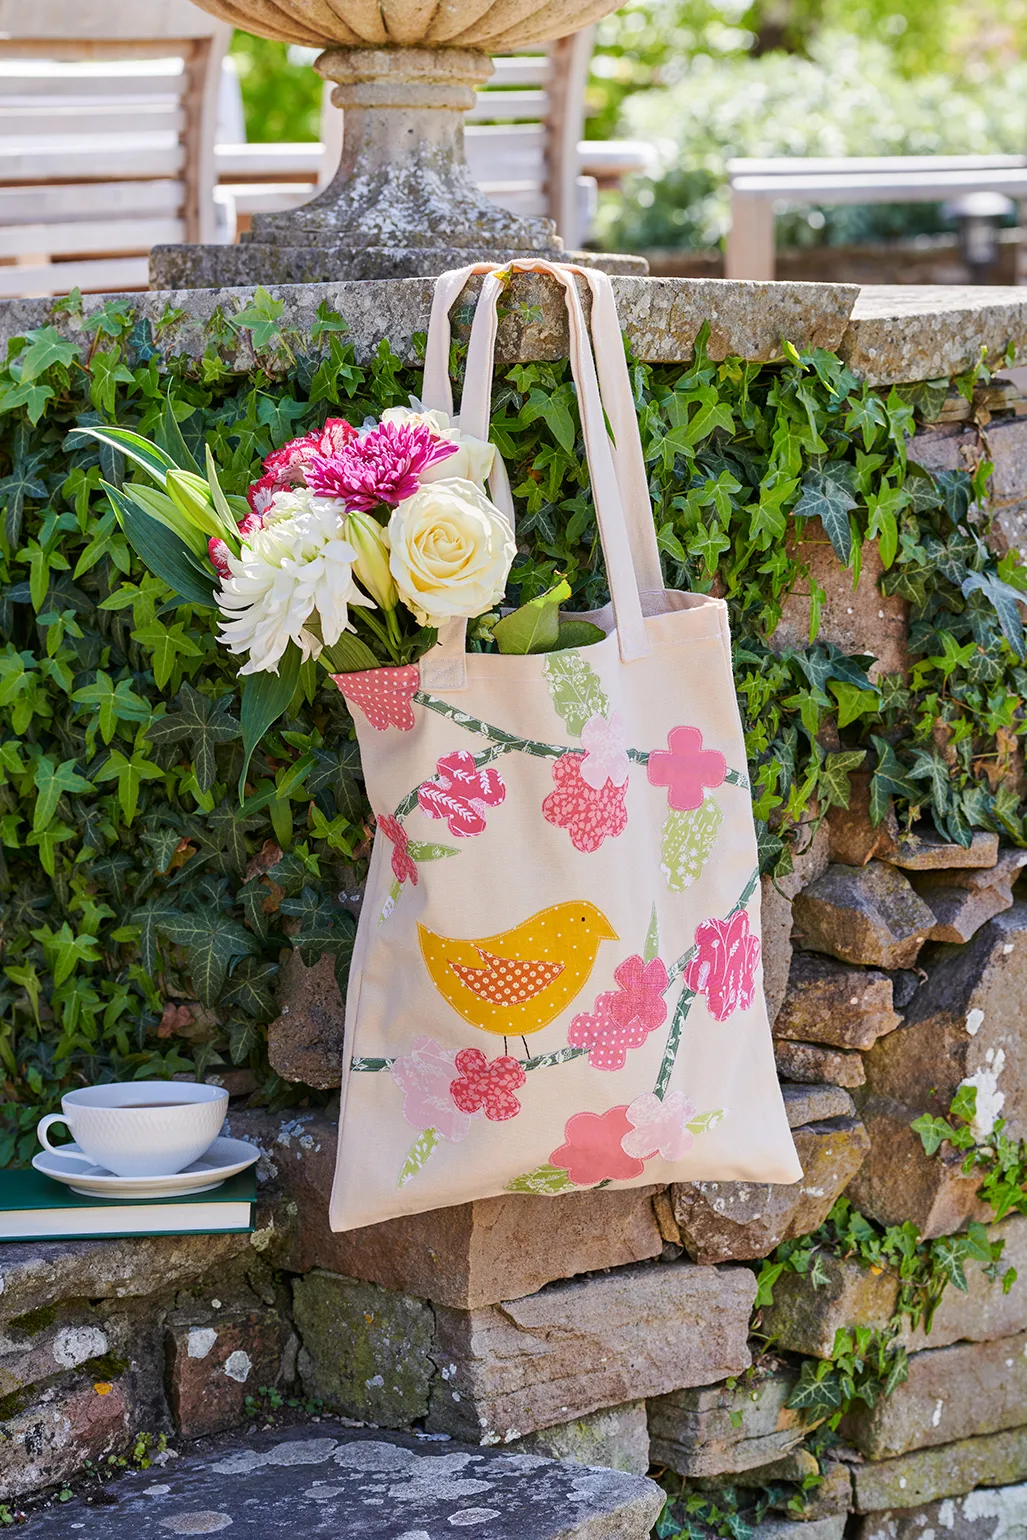 How to apply applique to a tote bag spring